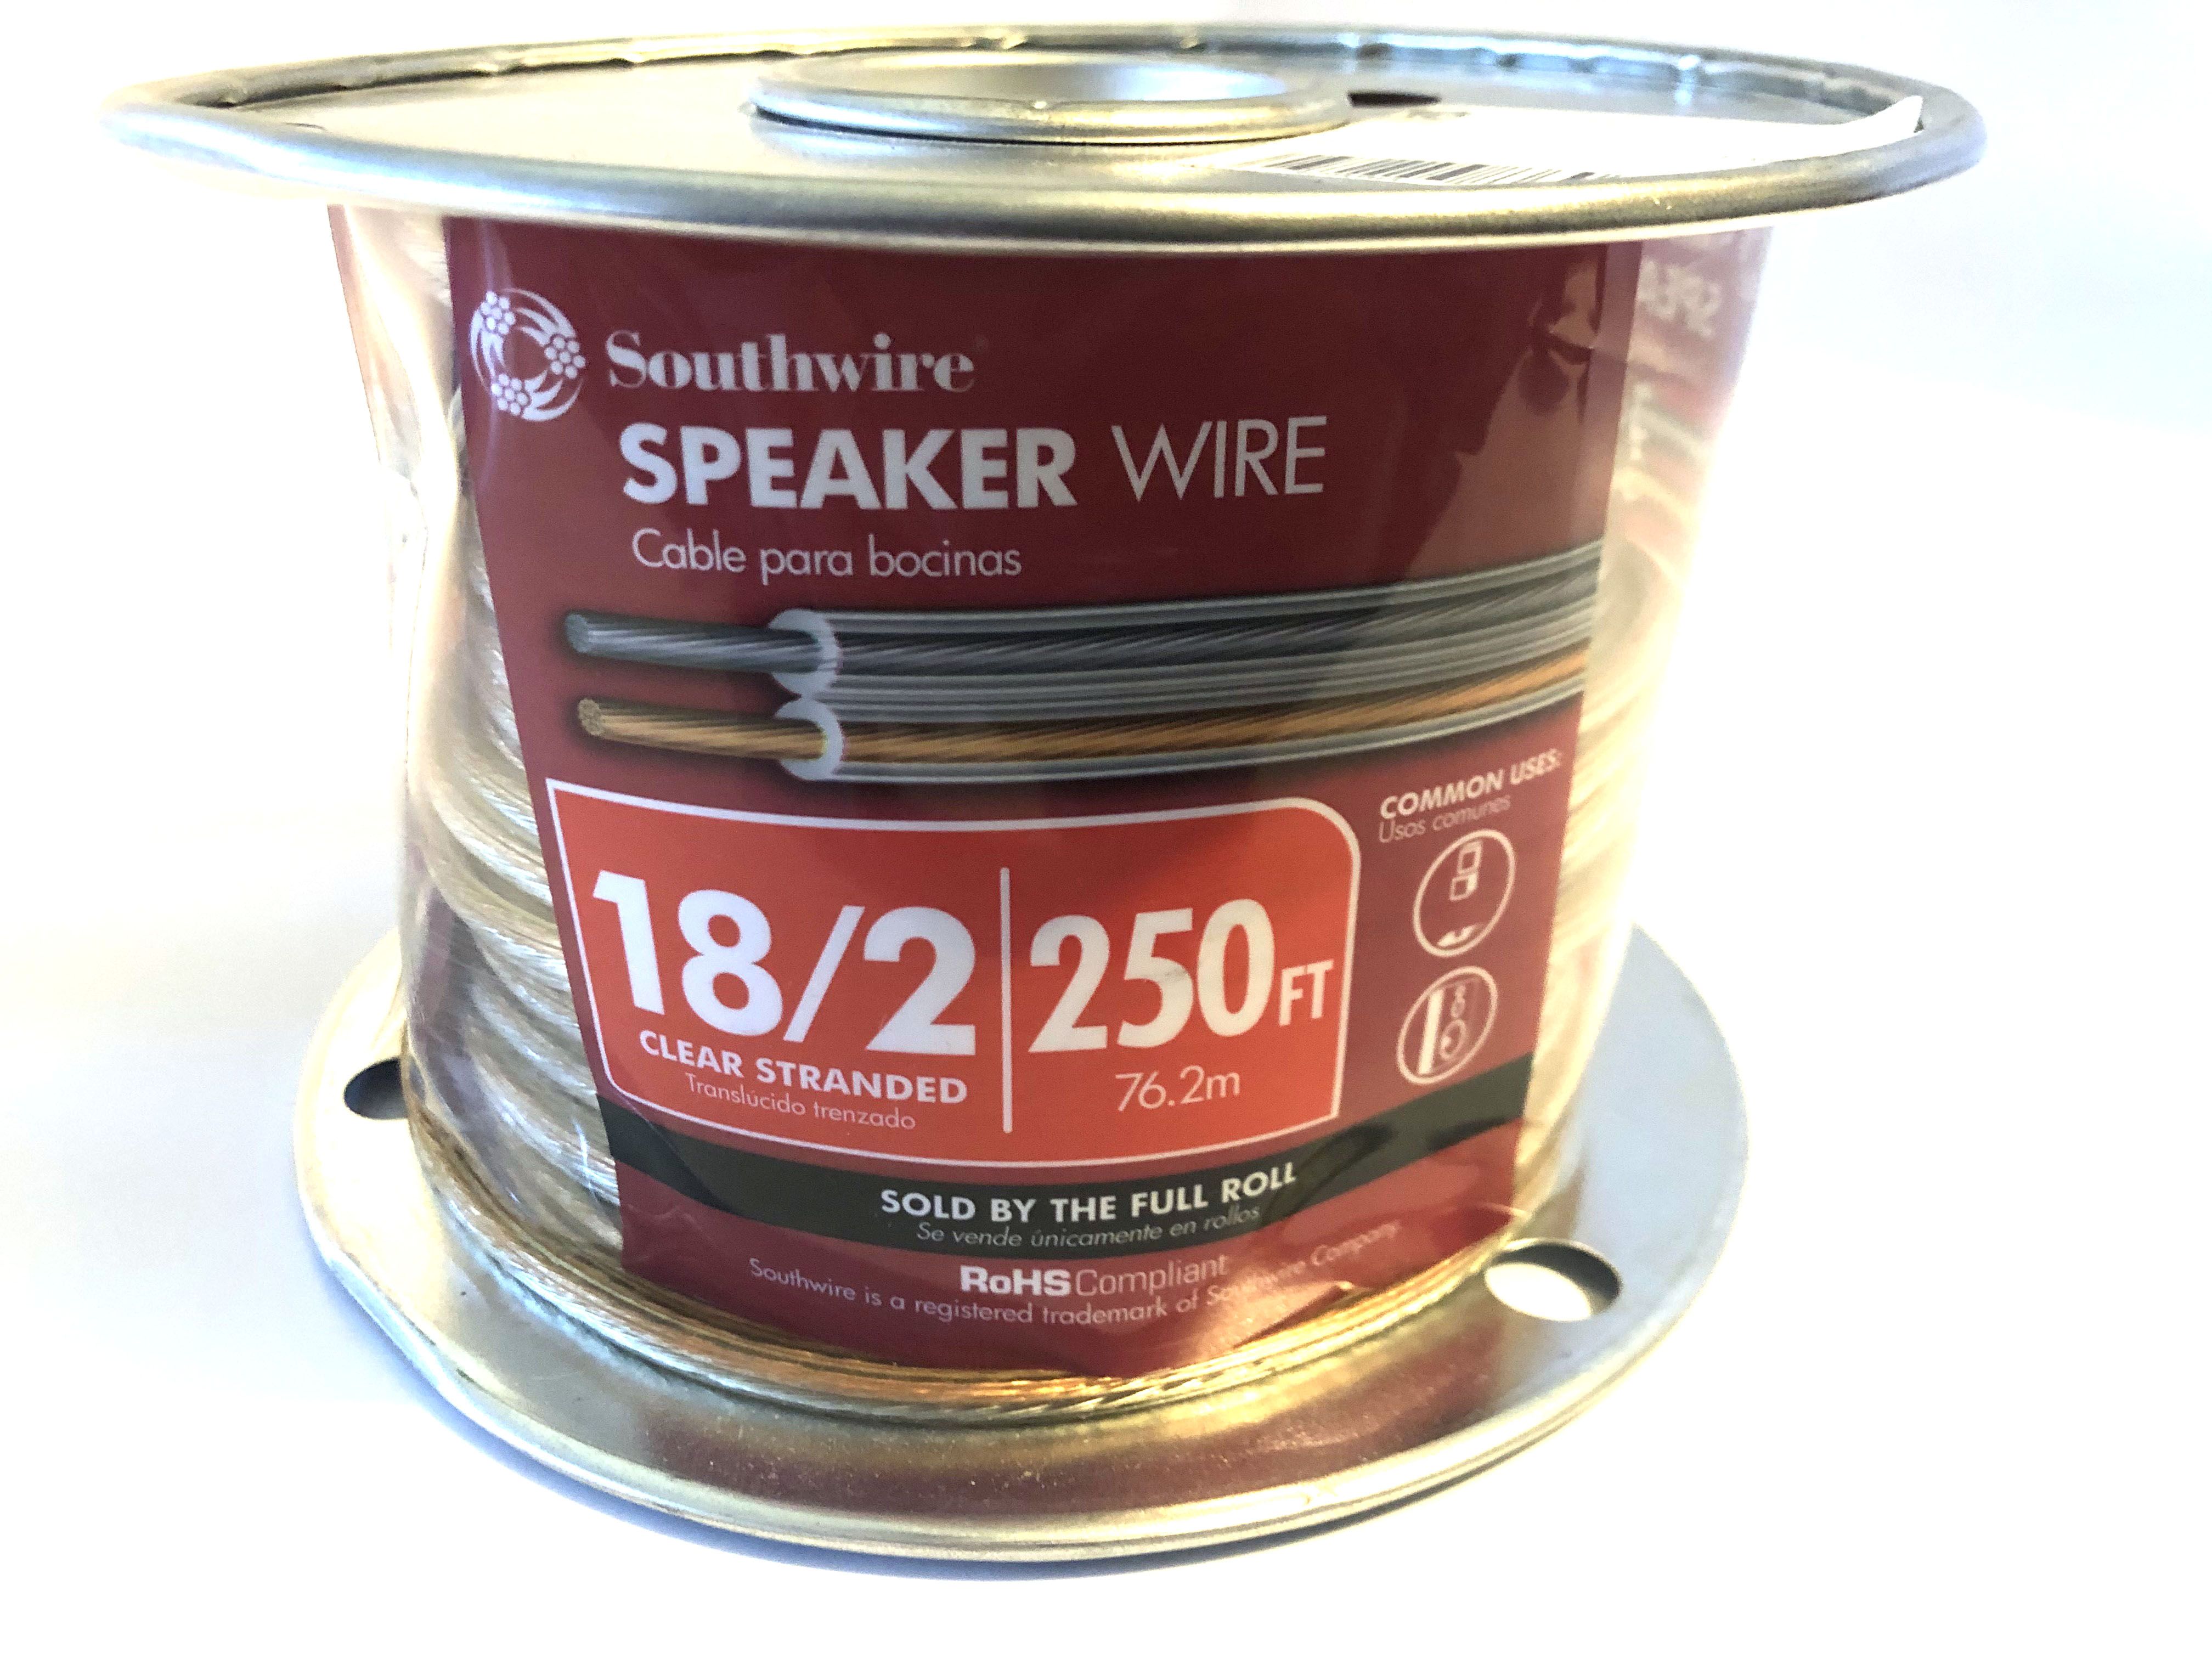 250-ft 18/2 Standard Speaker Wire - Southwire **NEW UNOPENED**